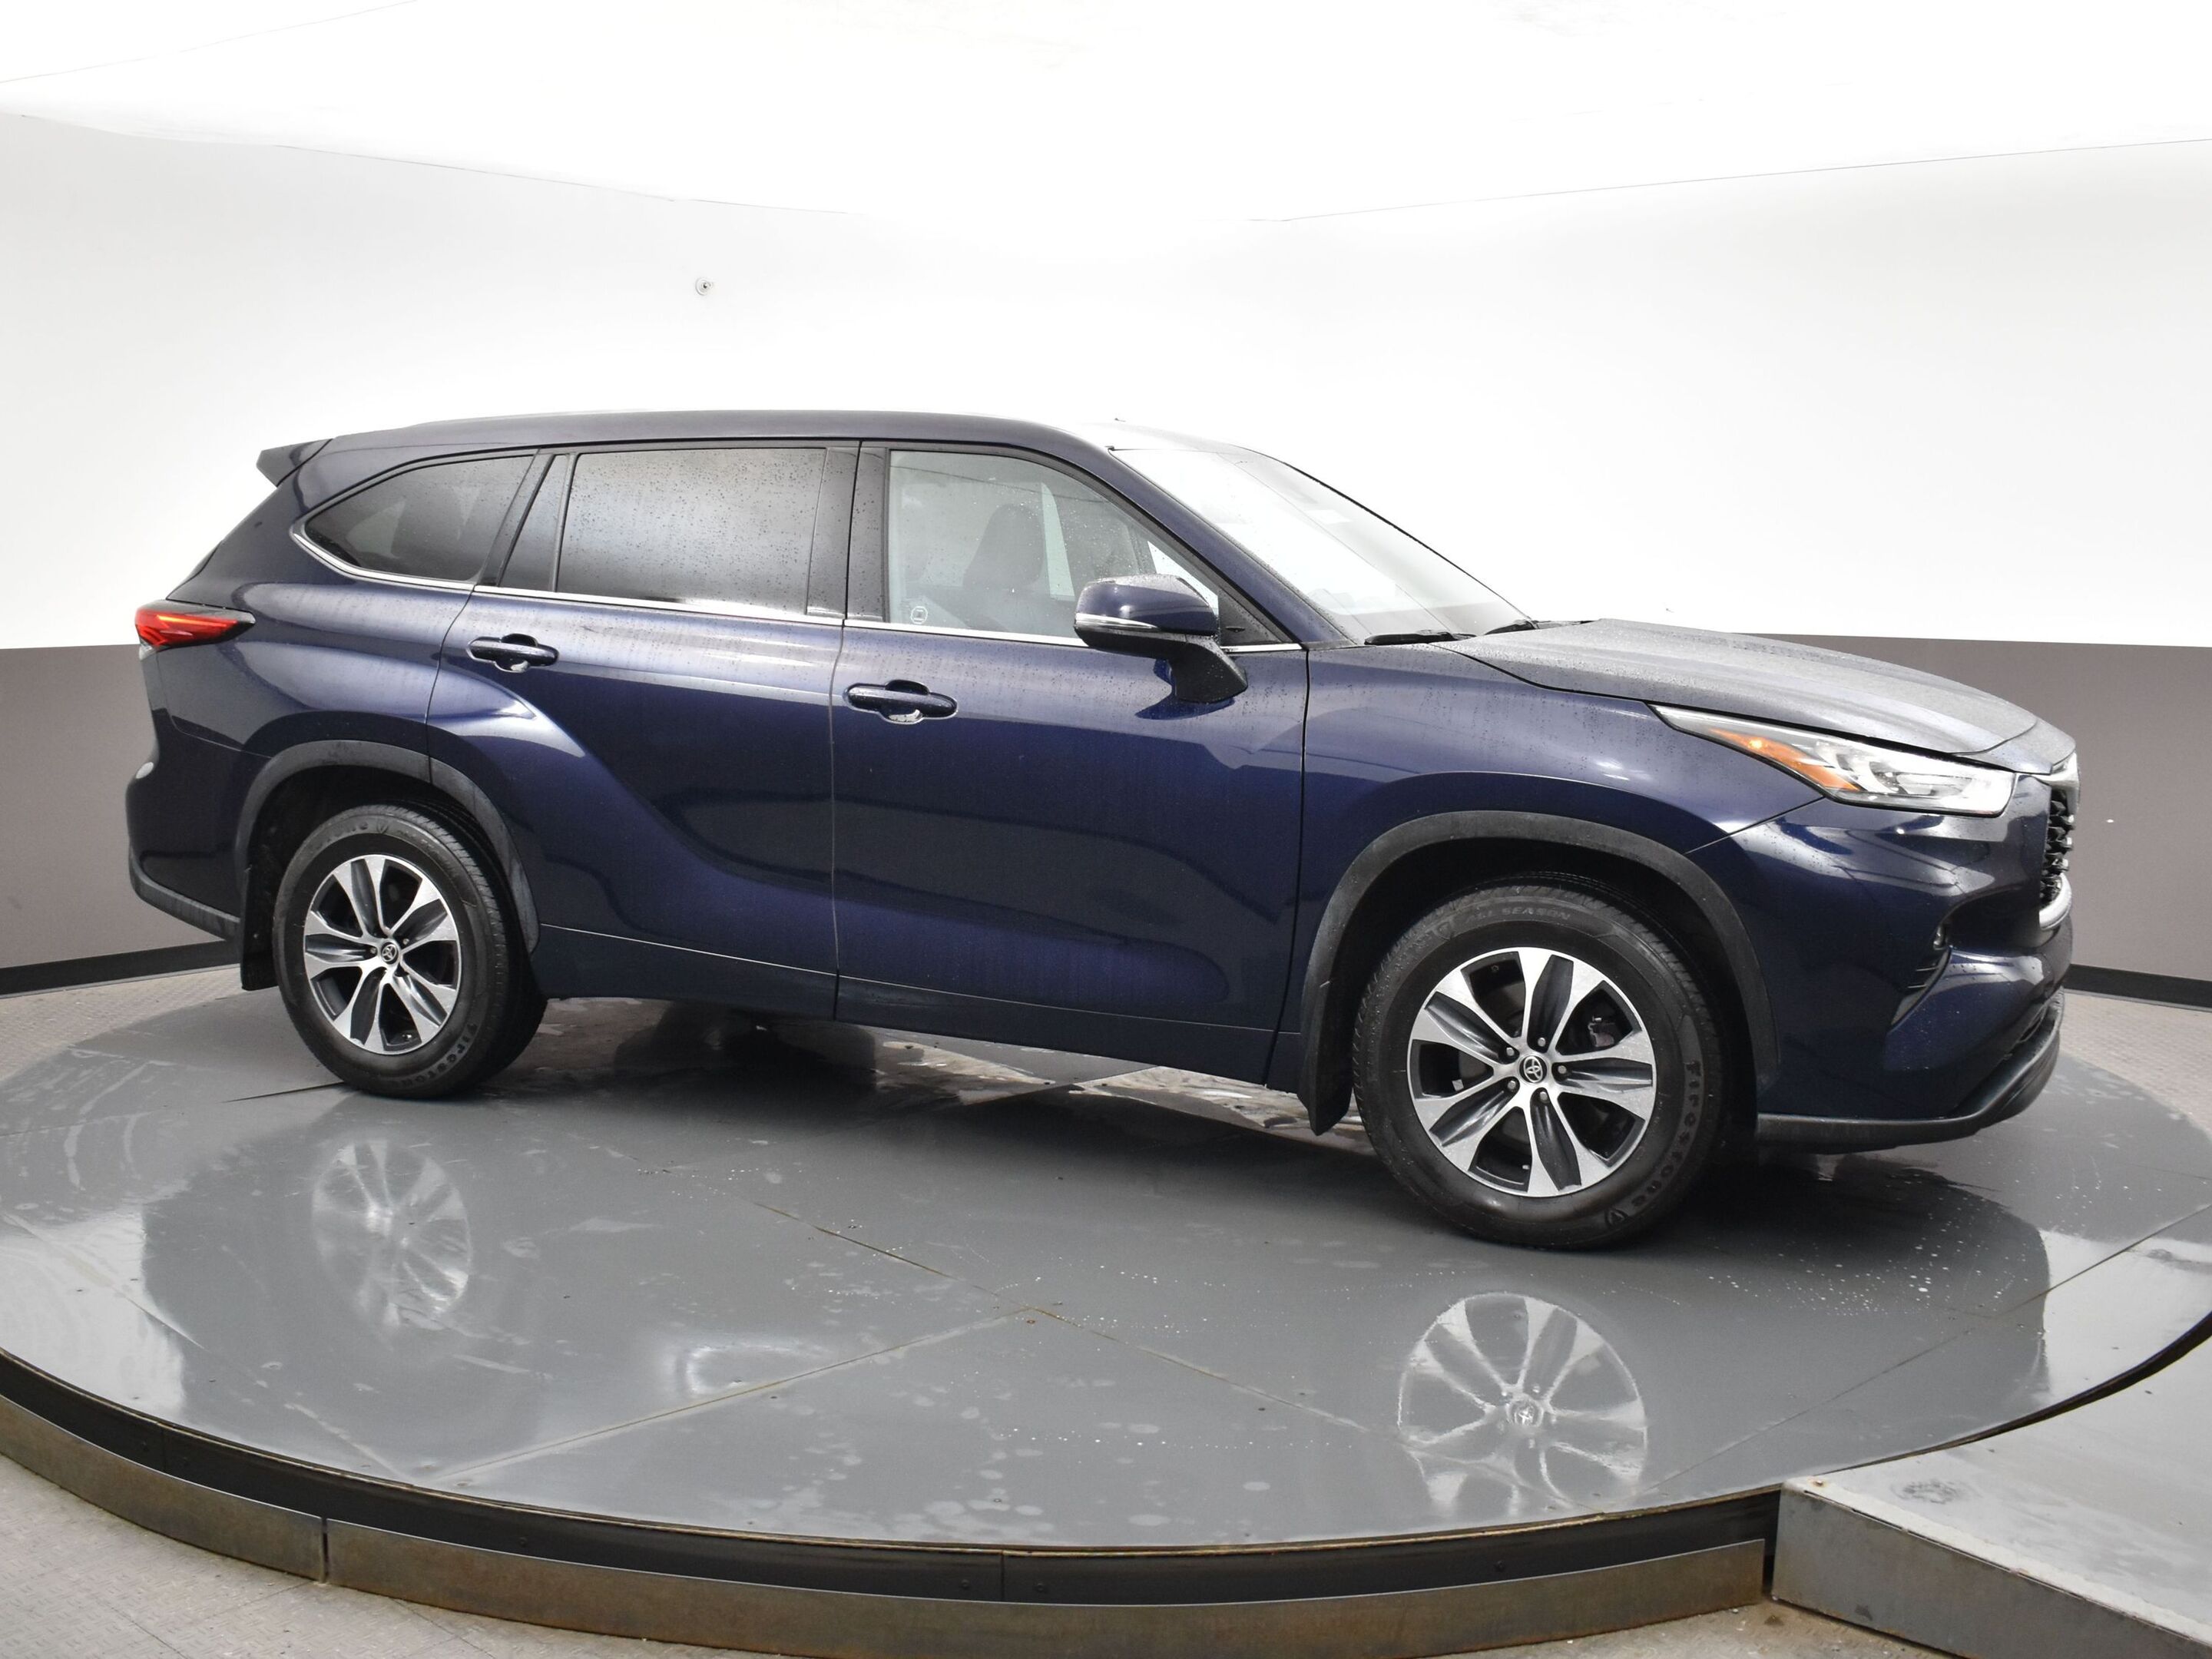 2021 Toyota Highlander XLE AWD with HEATED SEATS, SMARTPHONE CONNECTIVITY